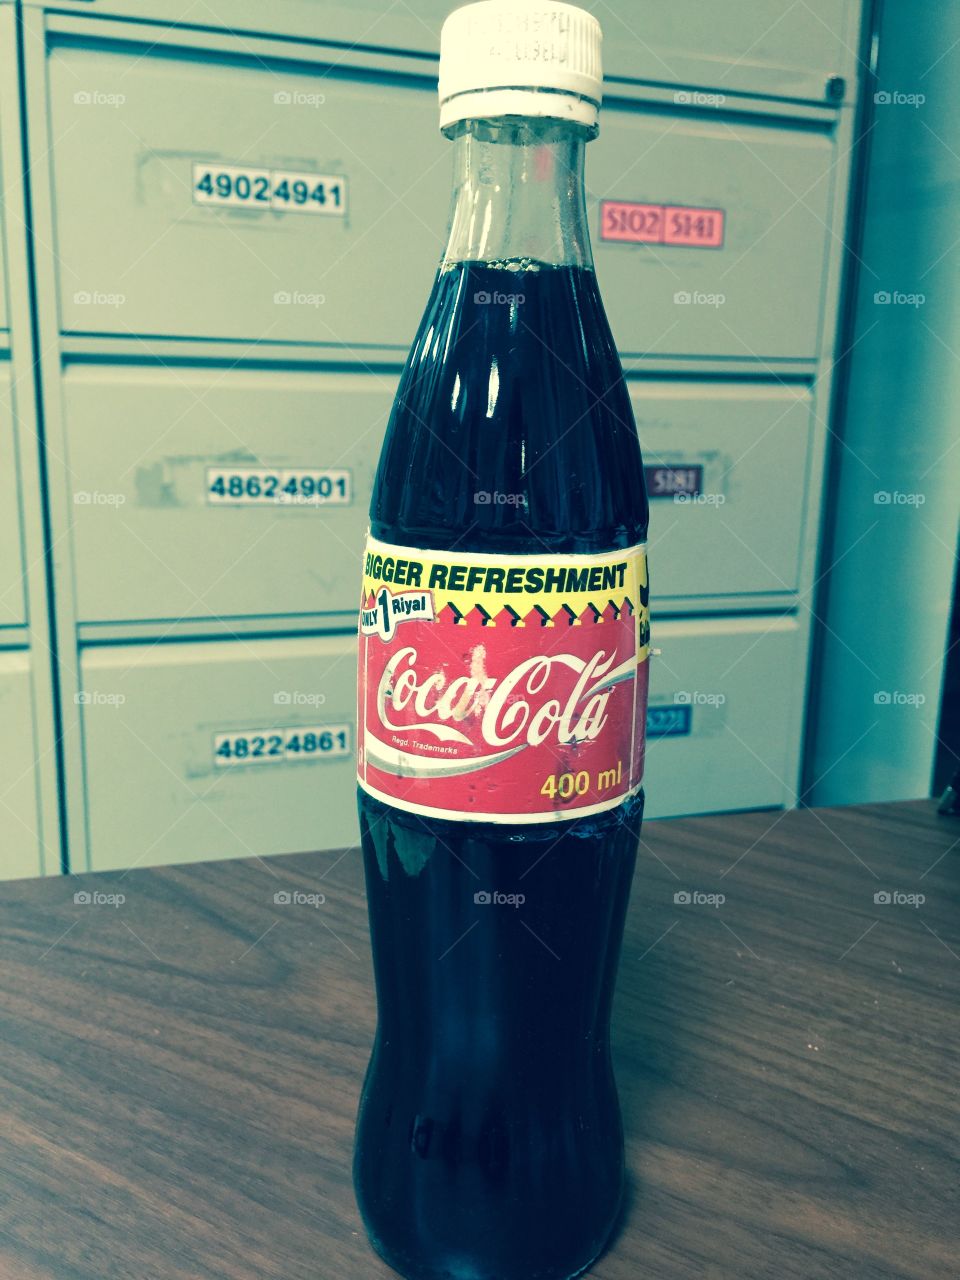 Coca-Cola. Producation Date: August 05, 1997
Expiration Date: August 04, 1998